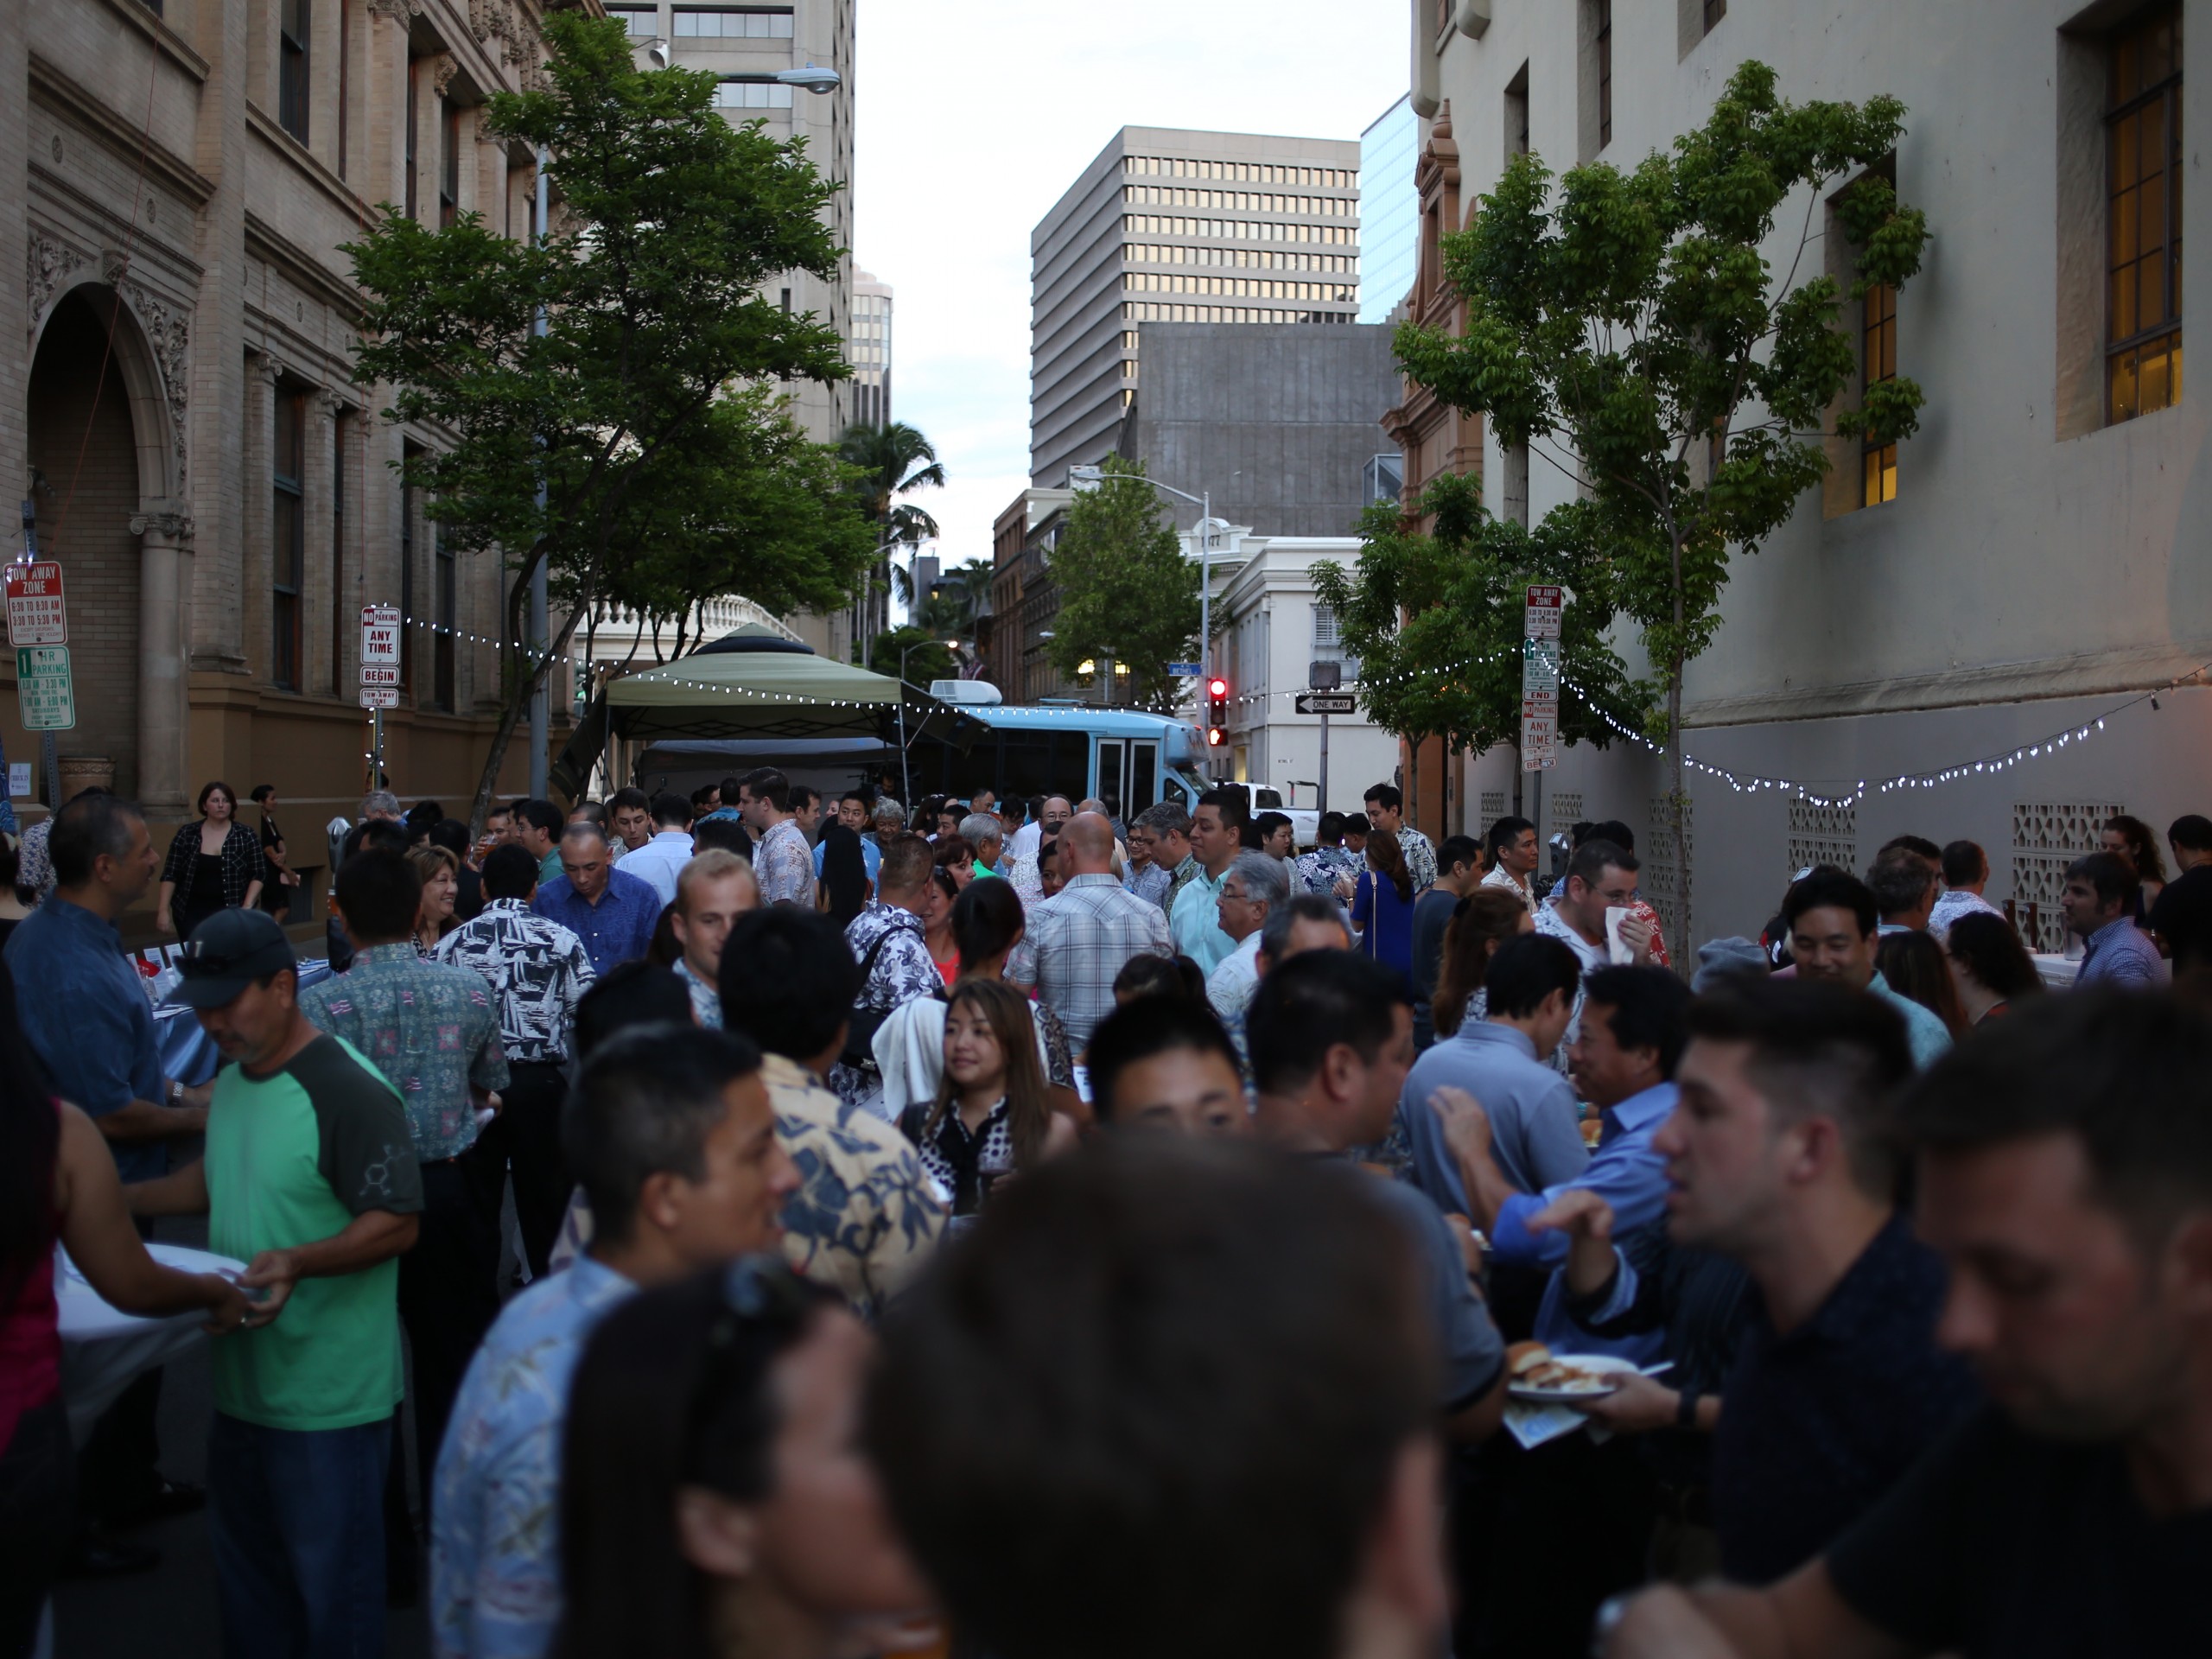 The crowd mingling among themselves at the Pau Hana Block Party.